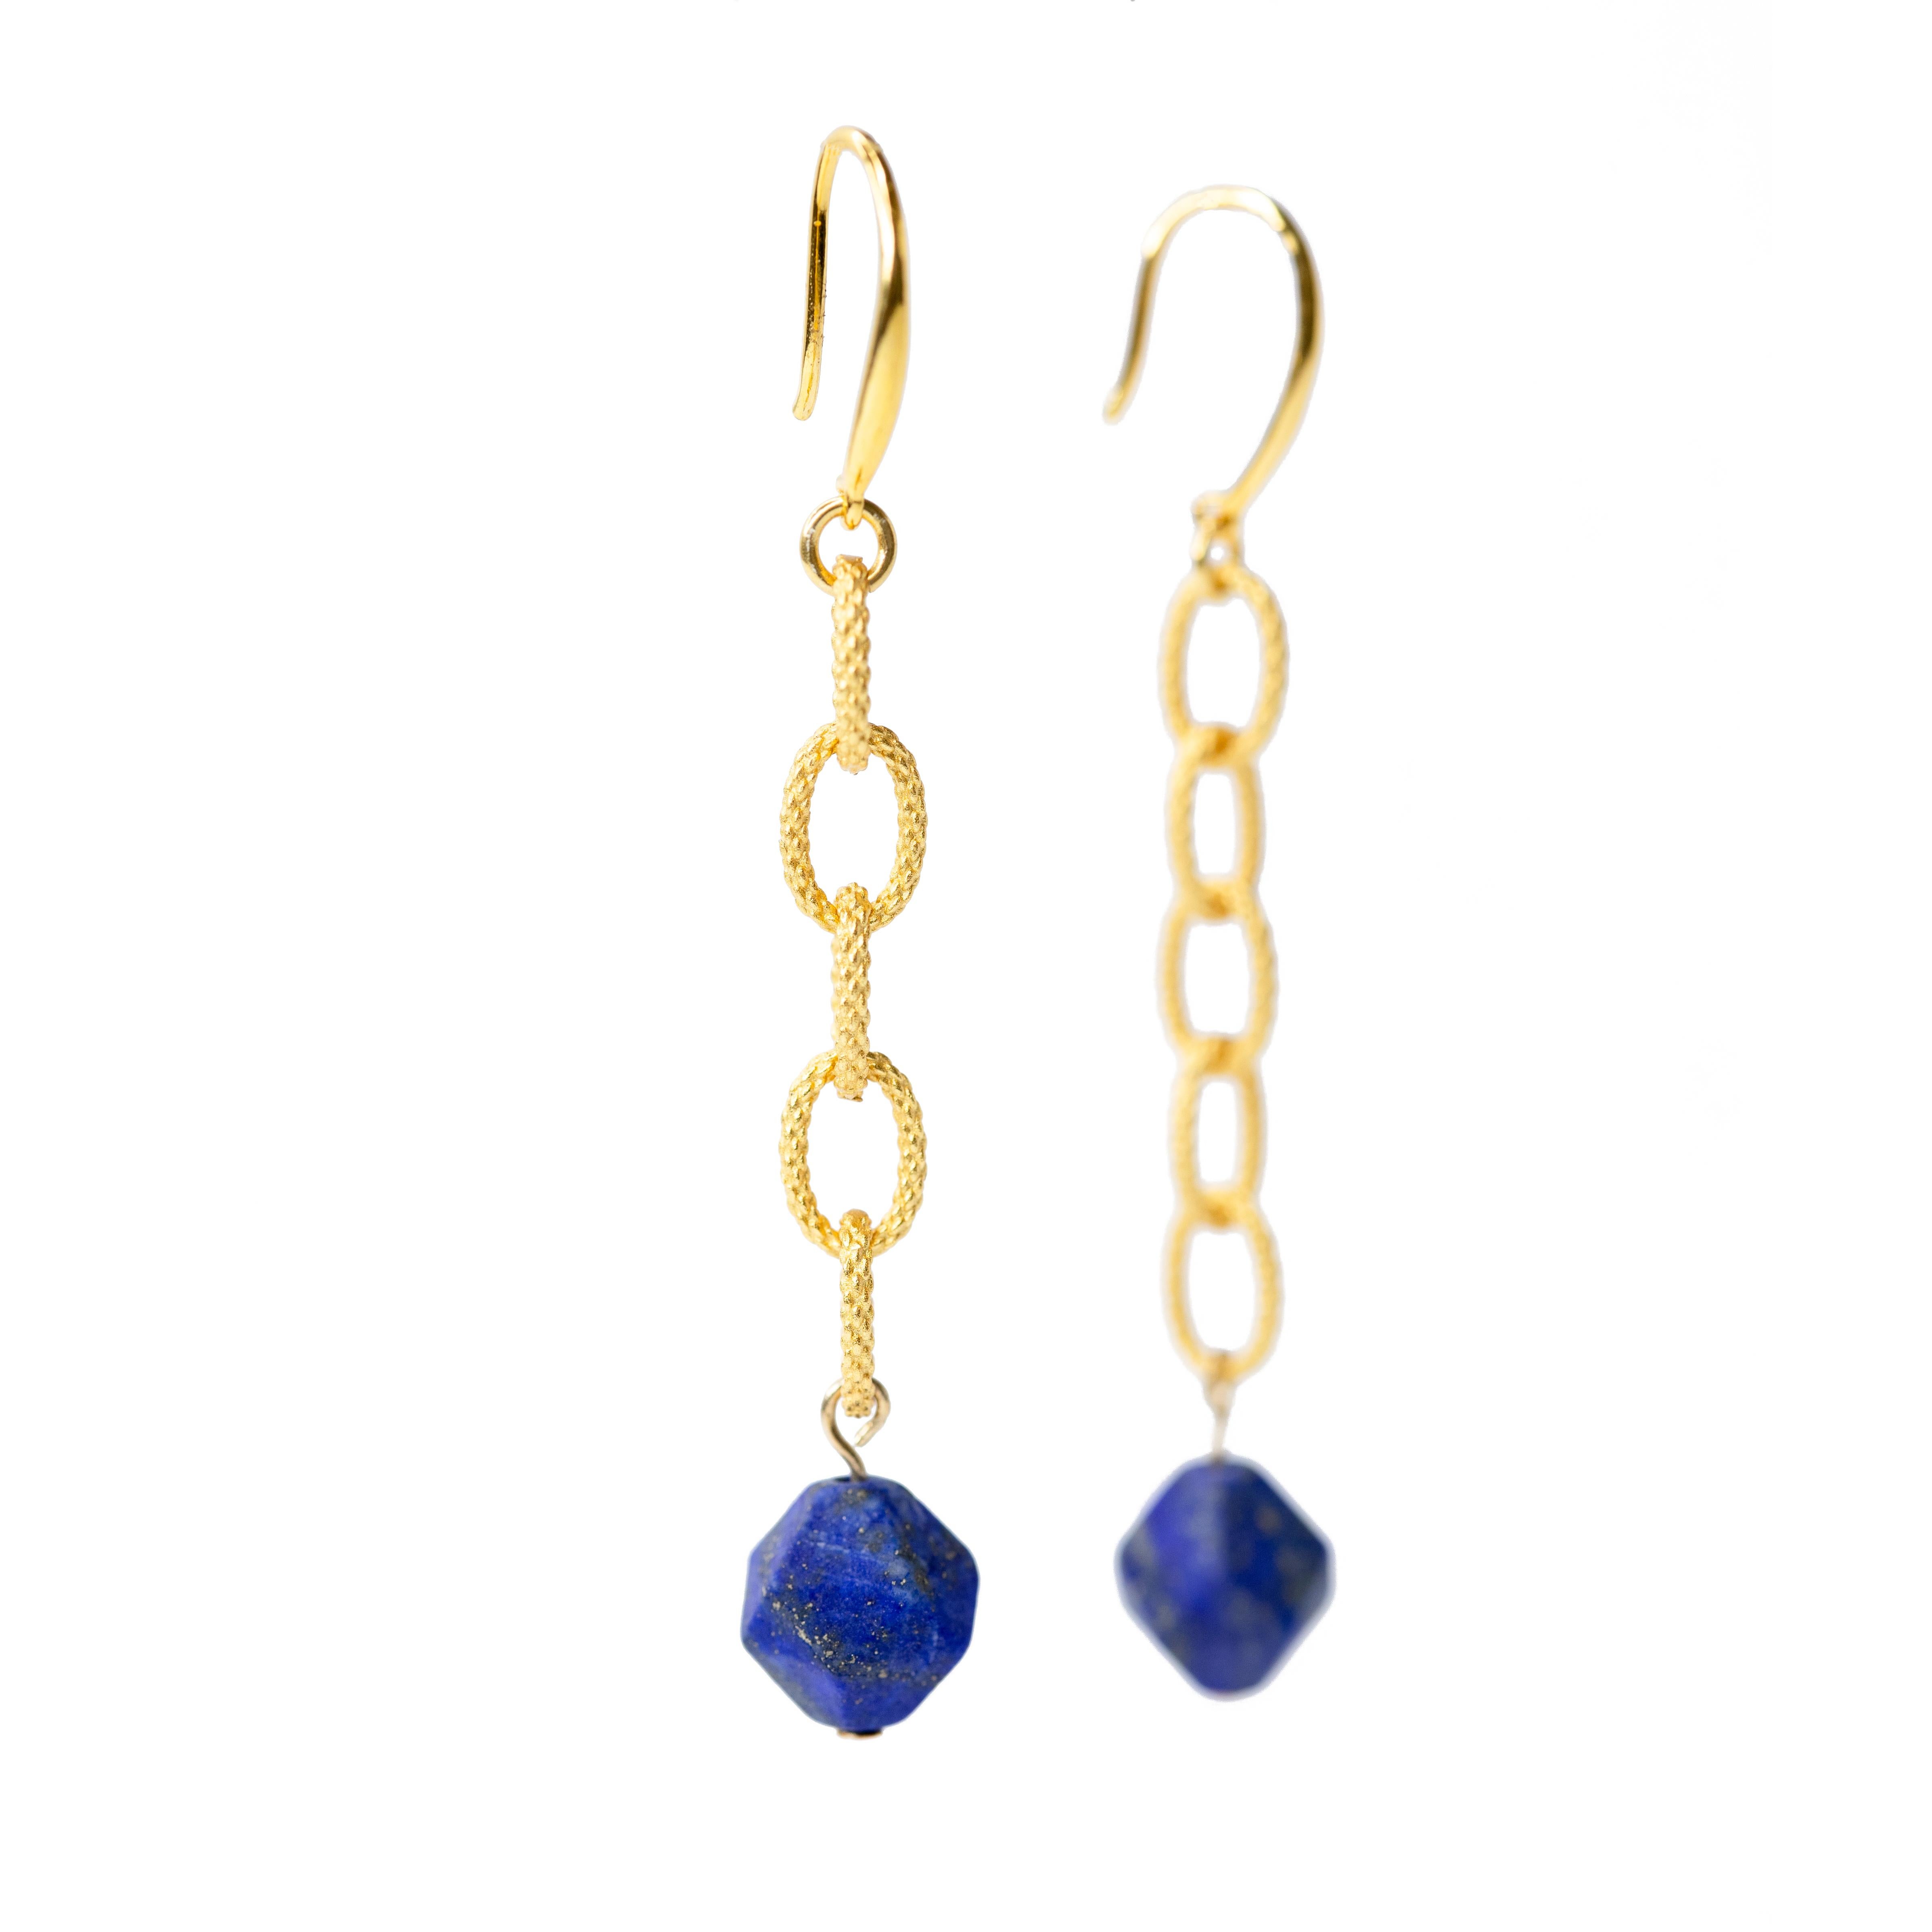 Lapis Lazuli Earring - Blue Madrid Earrings by Bombyx House In New Condition For Sale In Westport, CT